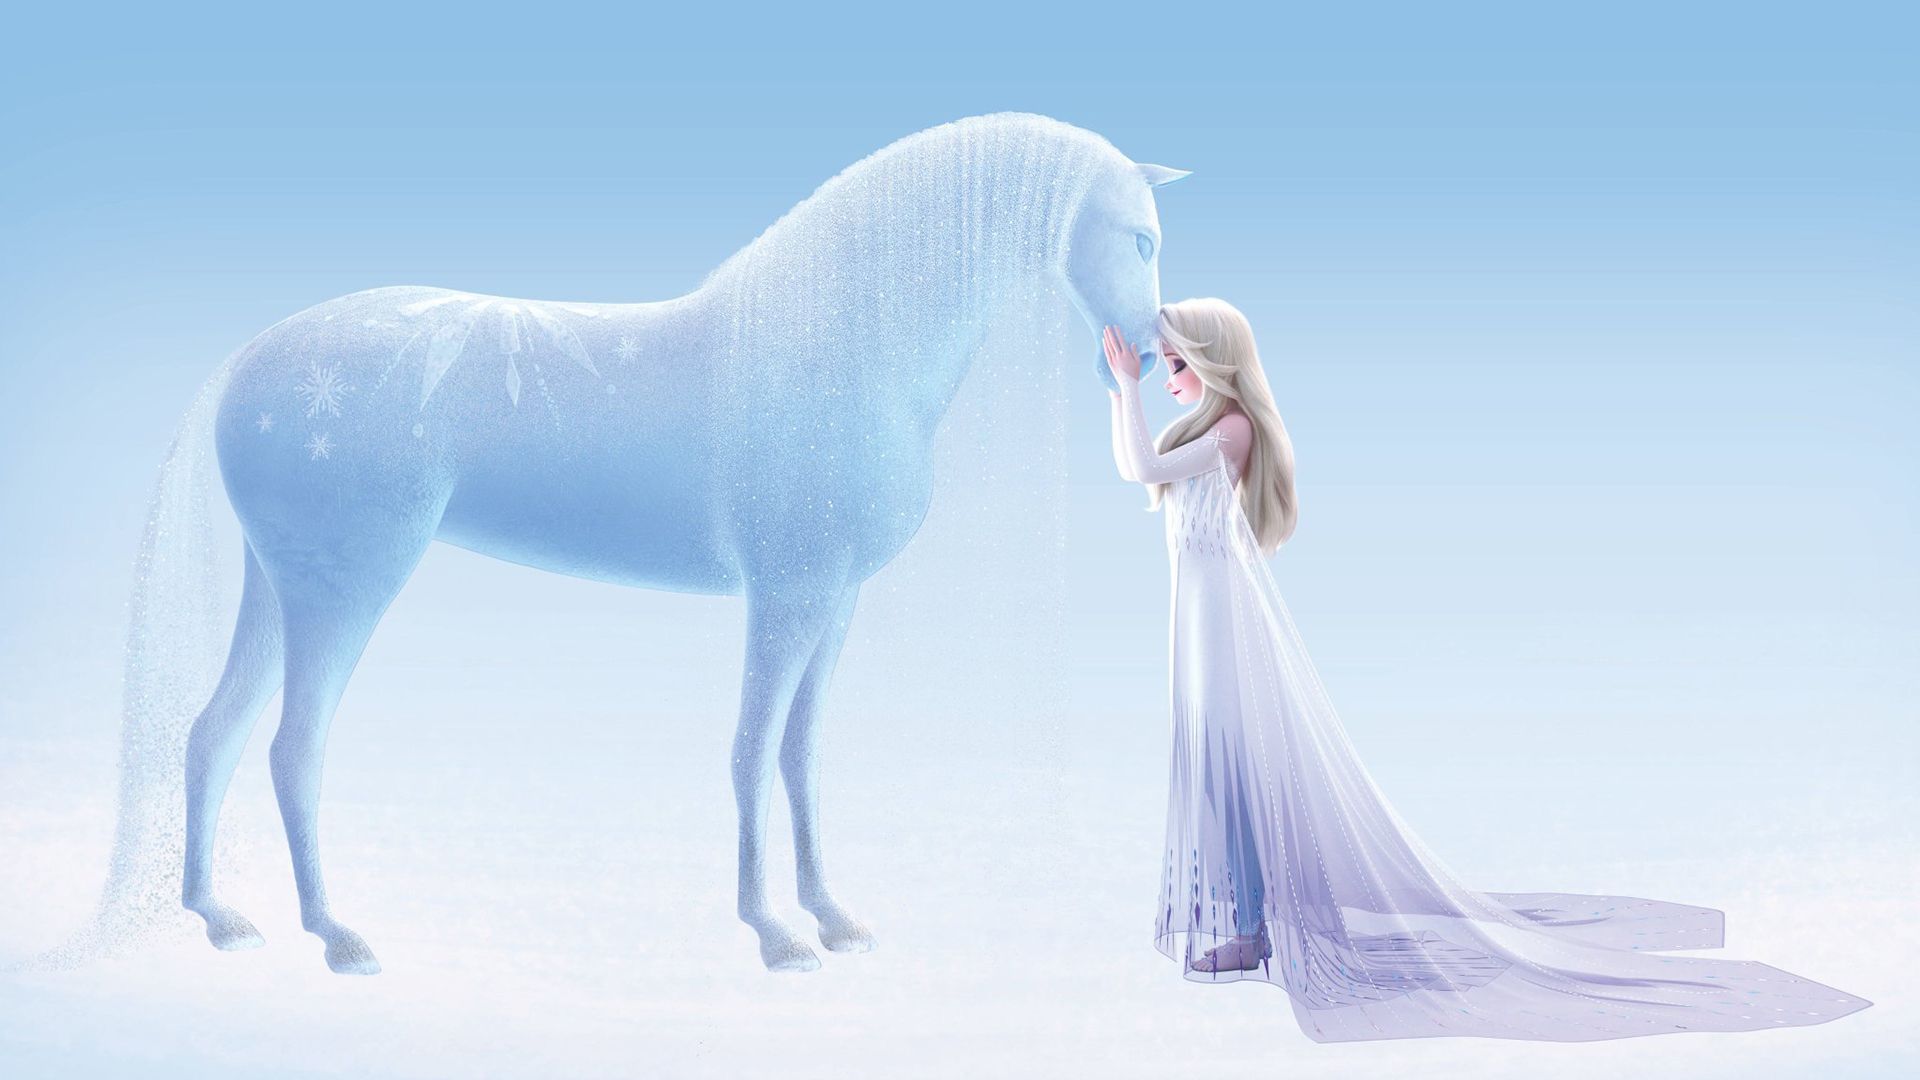 New image of Elsa in white dress shows details of frozen version of the water spirit